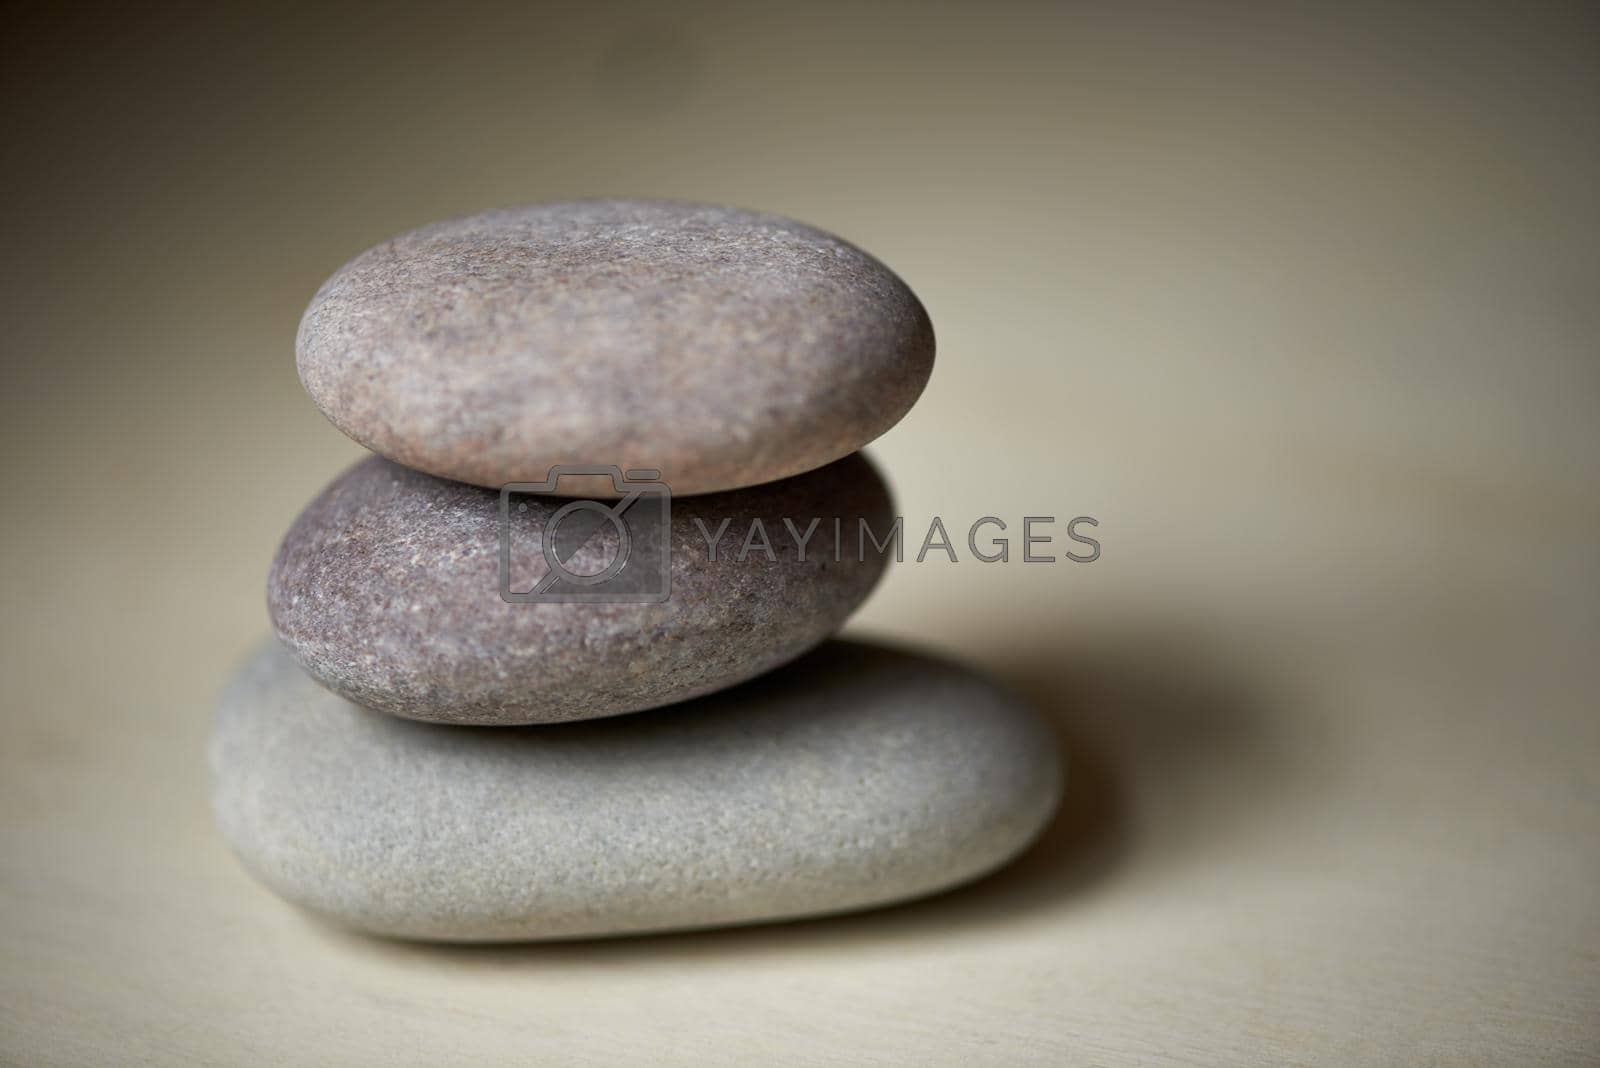 Royalty free image of Feeling balanced. Three stones balanced on top of each other in natural light. by YuriArcurs